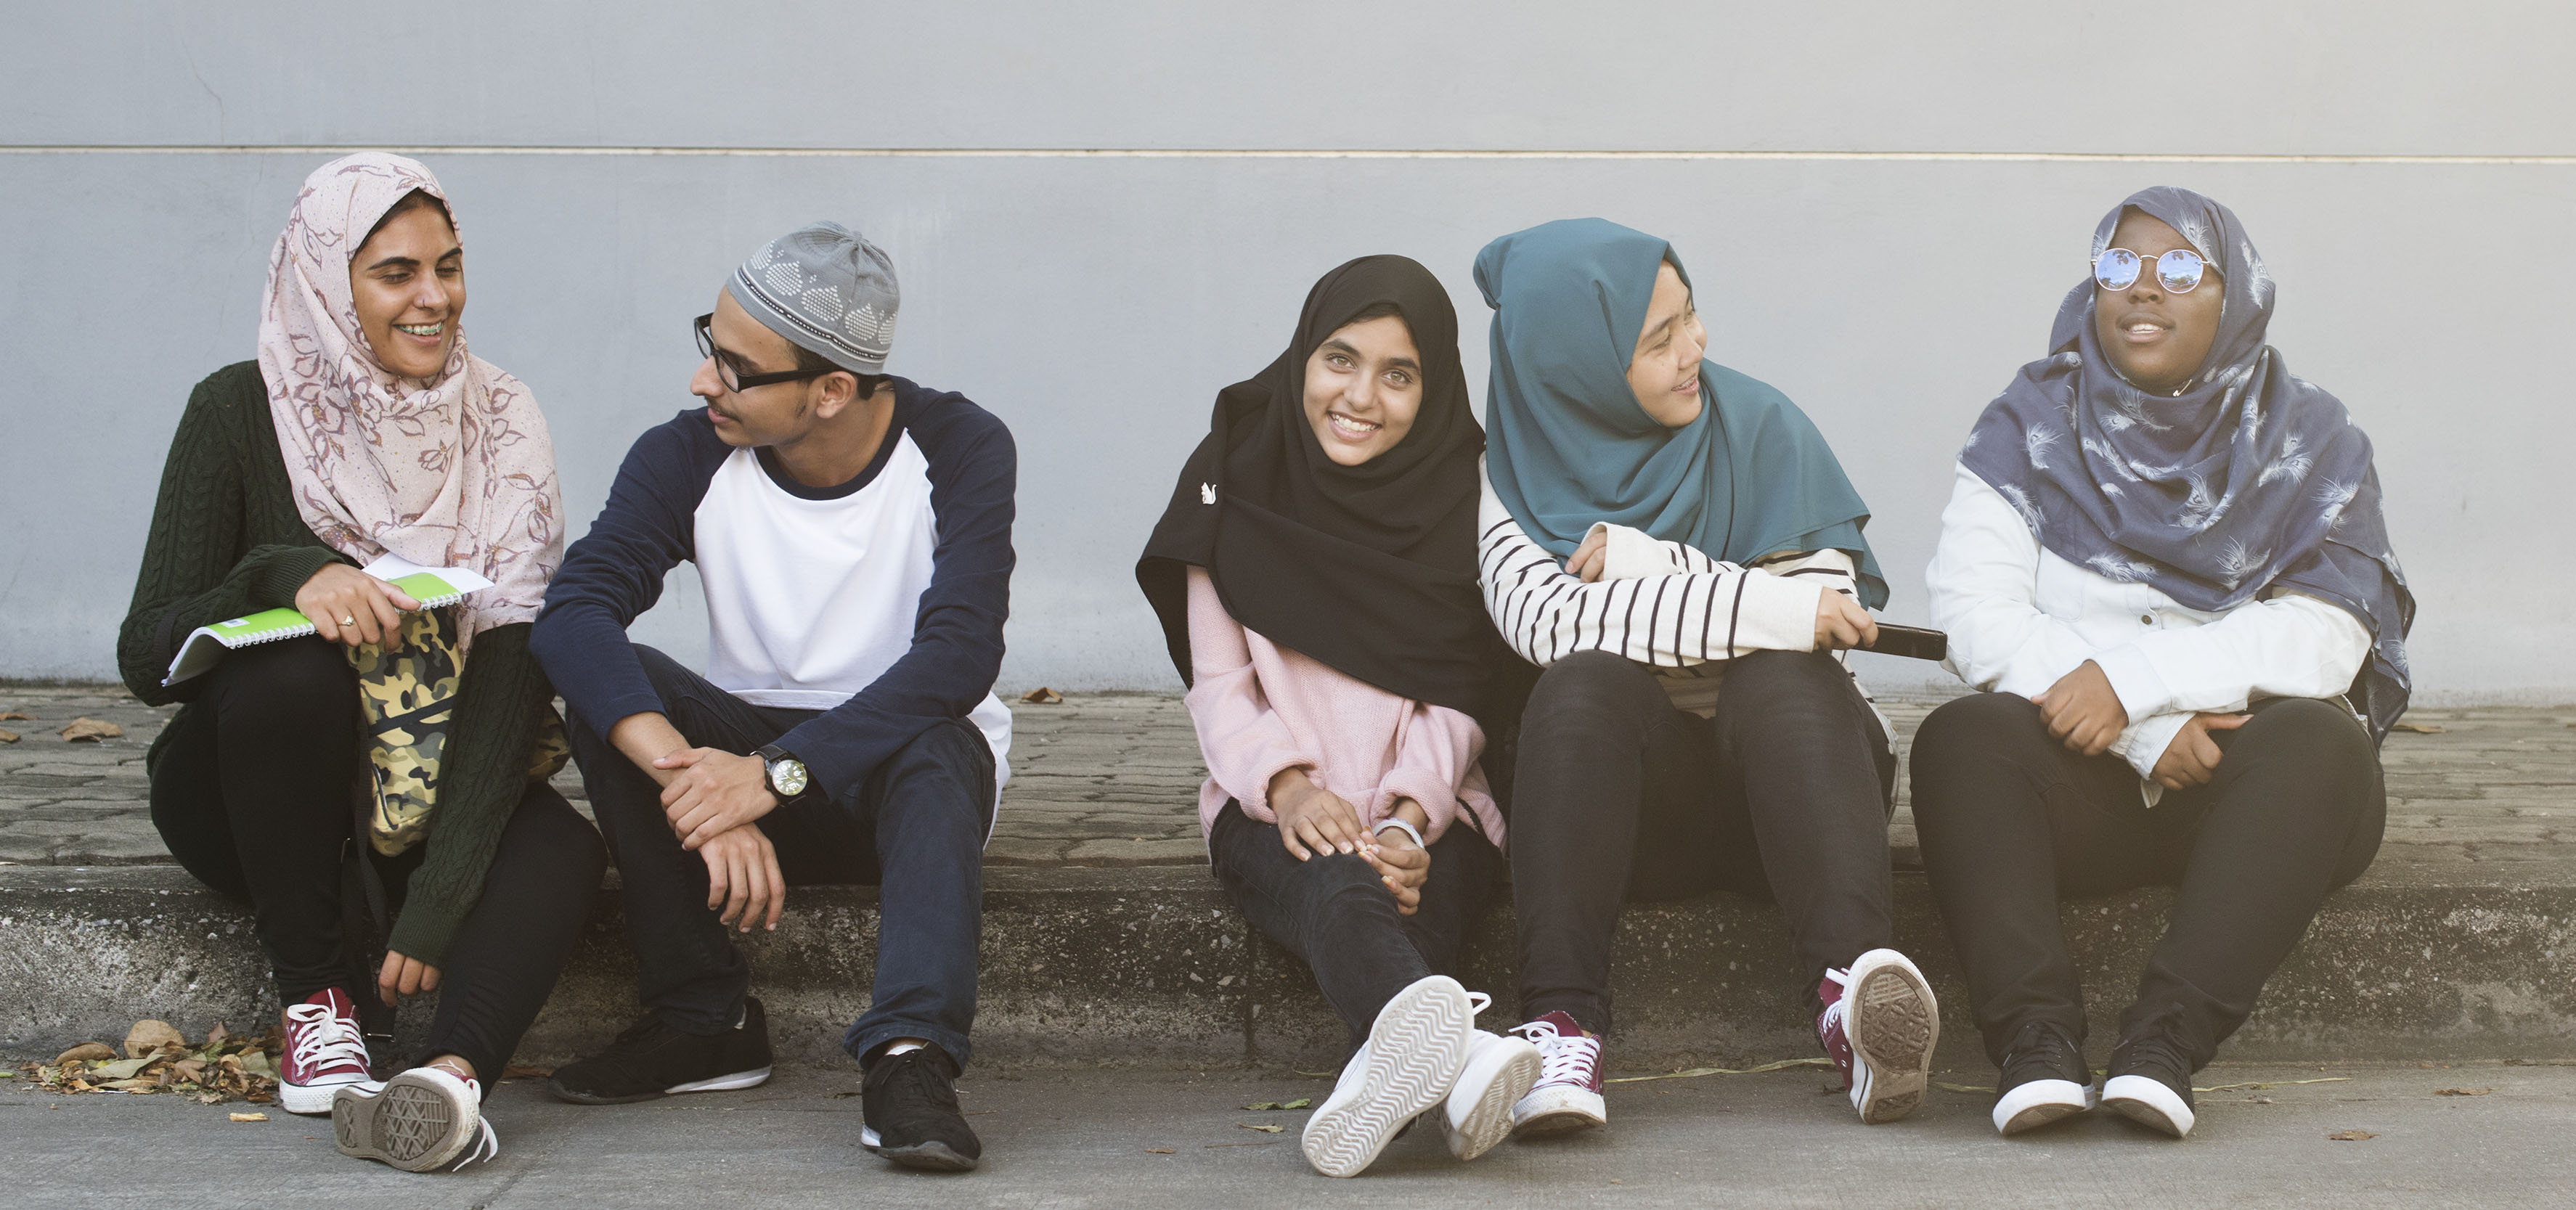 Indian Muslim Rich Teen Hd Porn - 11 Ways to Build modesty in Young Muslims | SoundVision.com